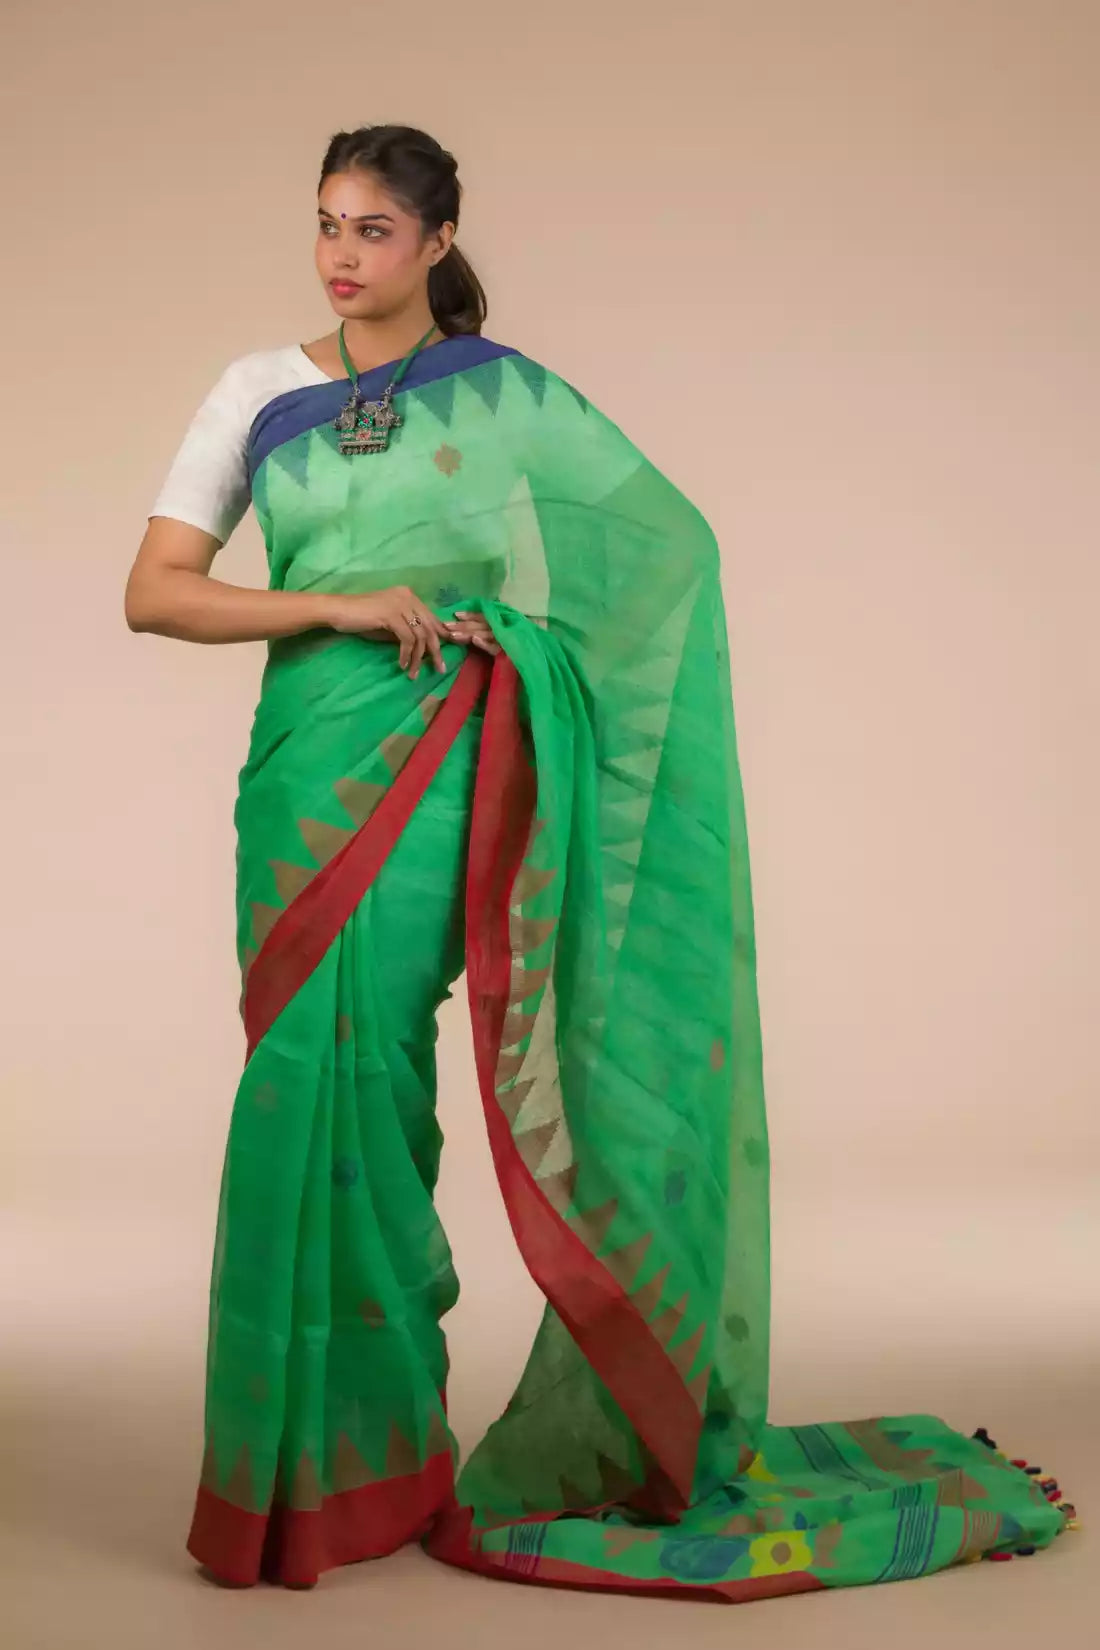 A lady in Green Jamdani hand weaving In Pure Linen Saree, womens workwear standing against a beige background